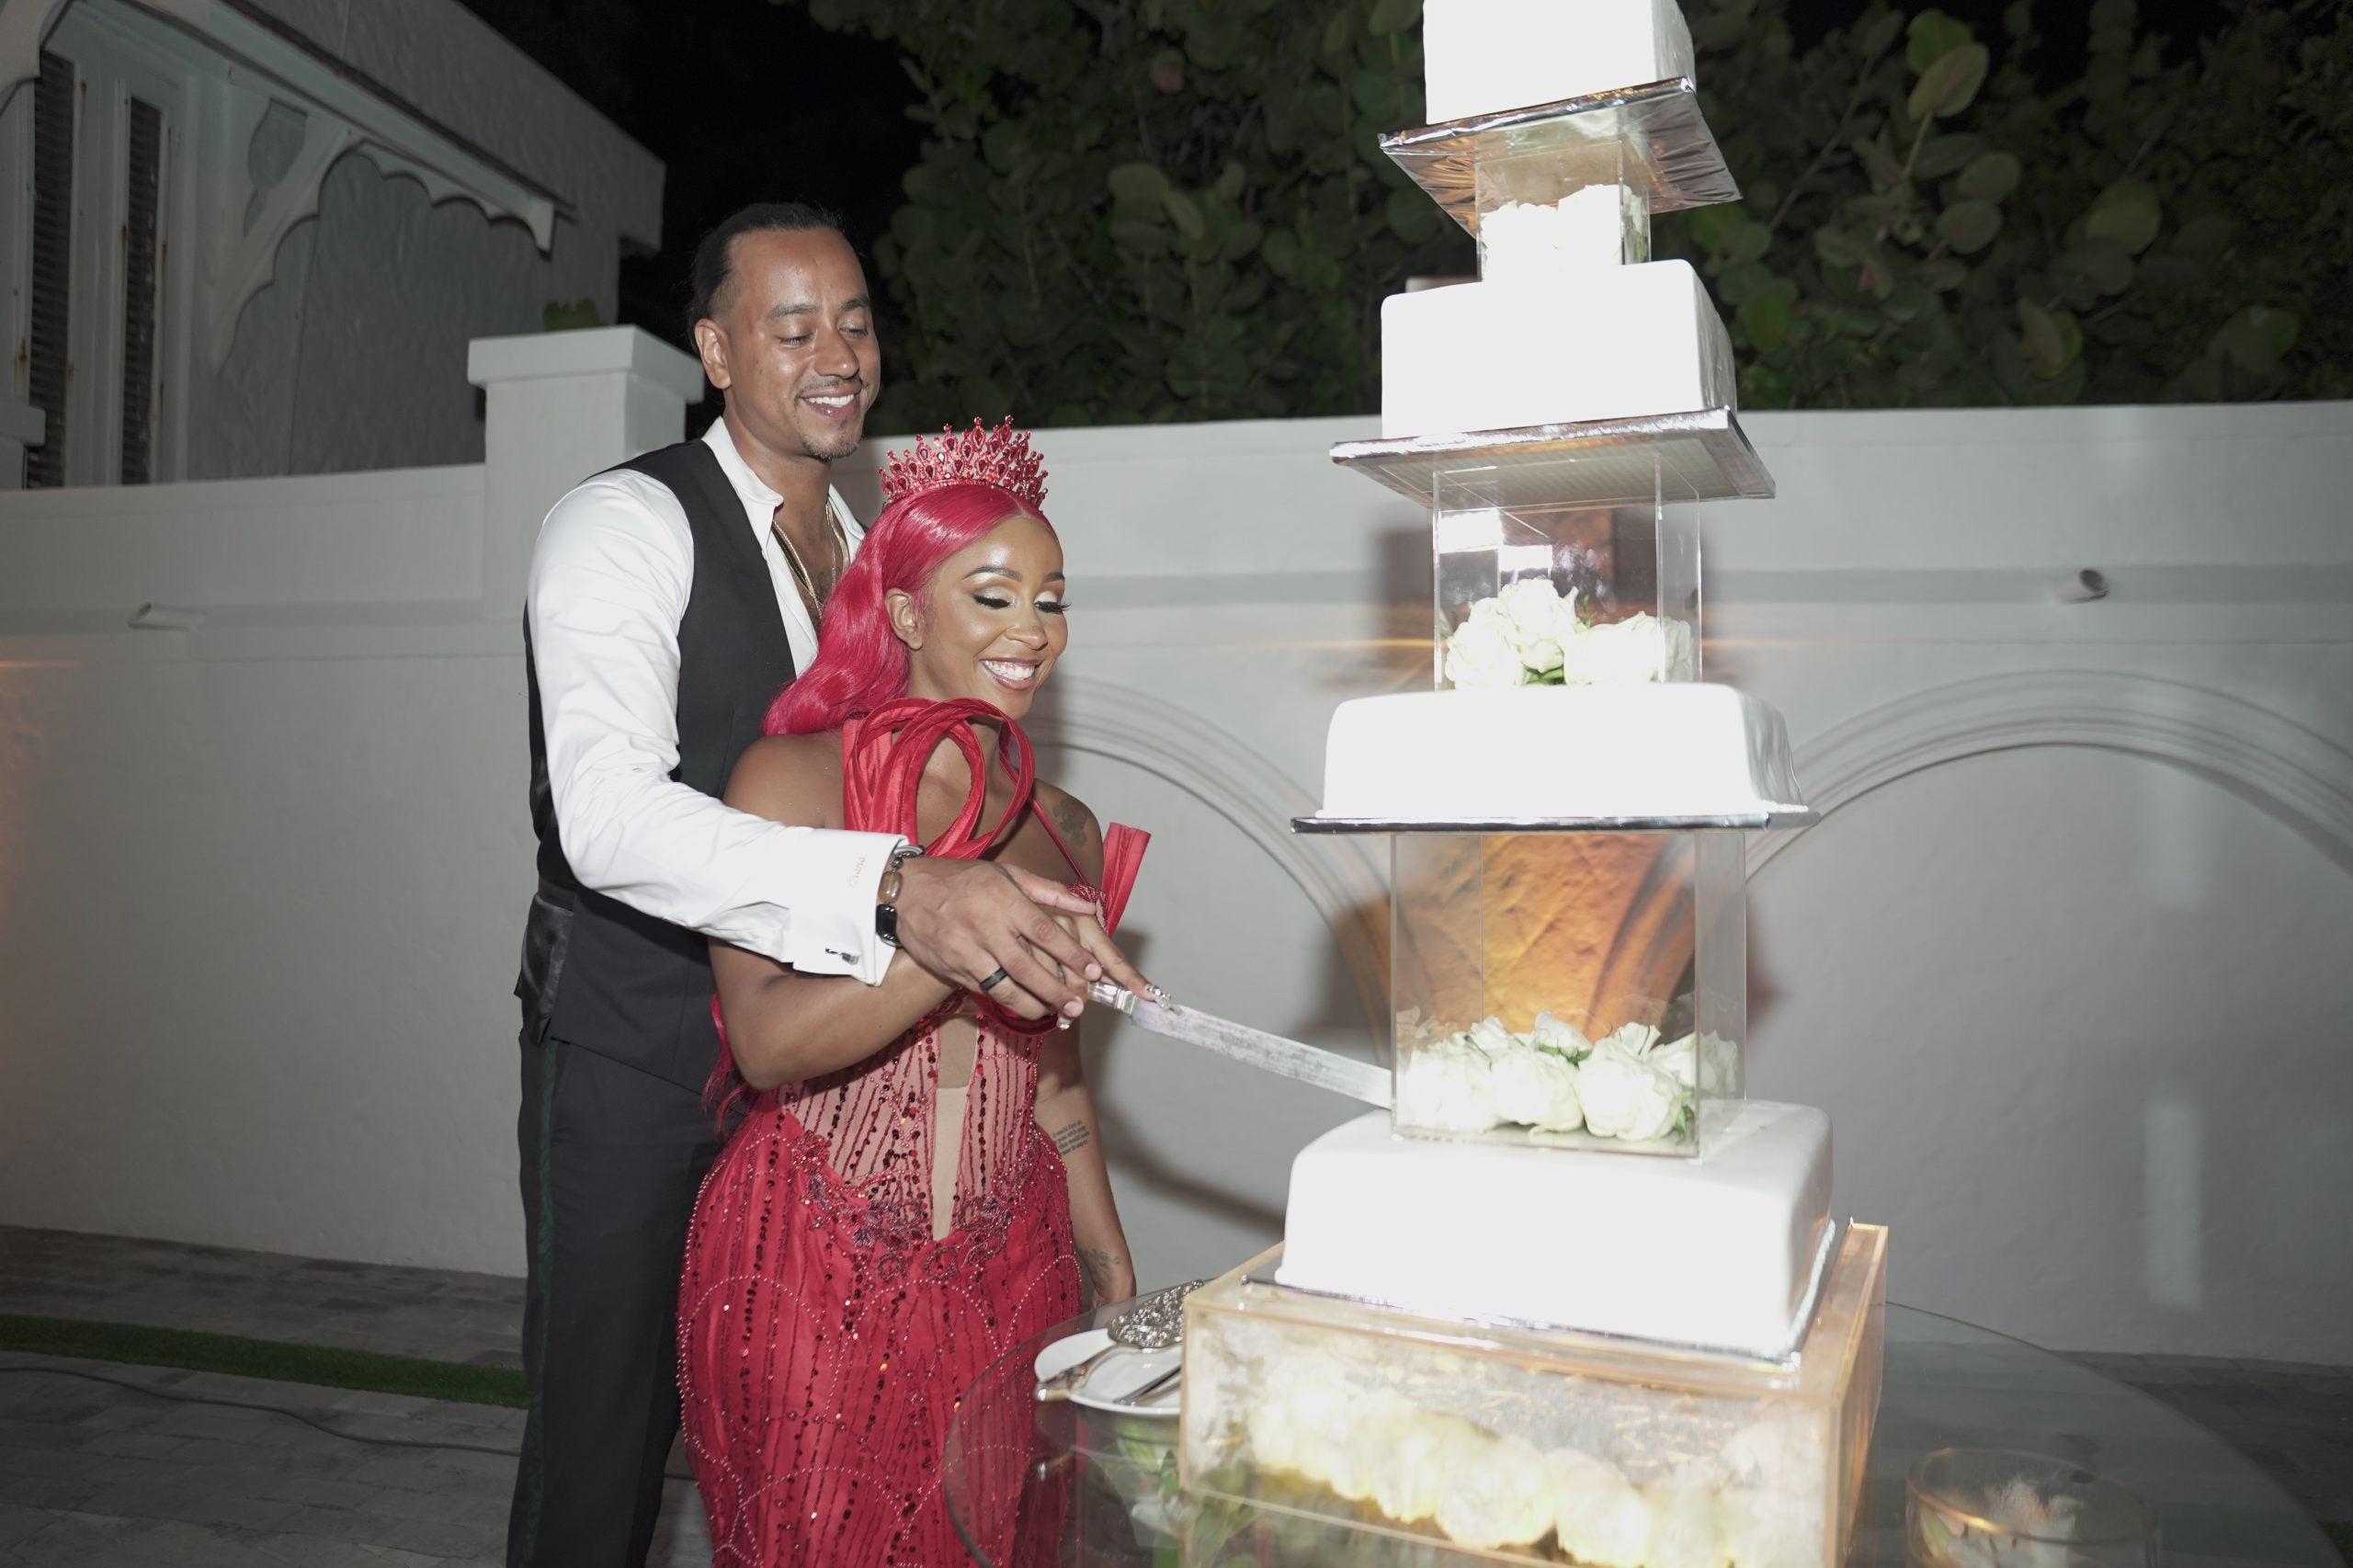 Bridal Bliss: After Proposing With Three Rings, Mario Married Chanell At A Castle In Jamaica